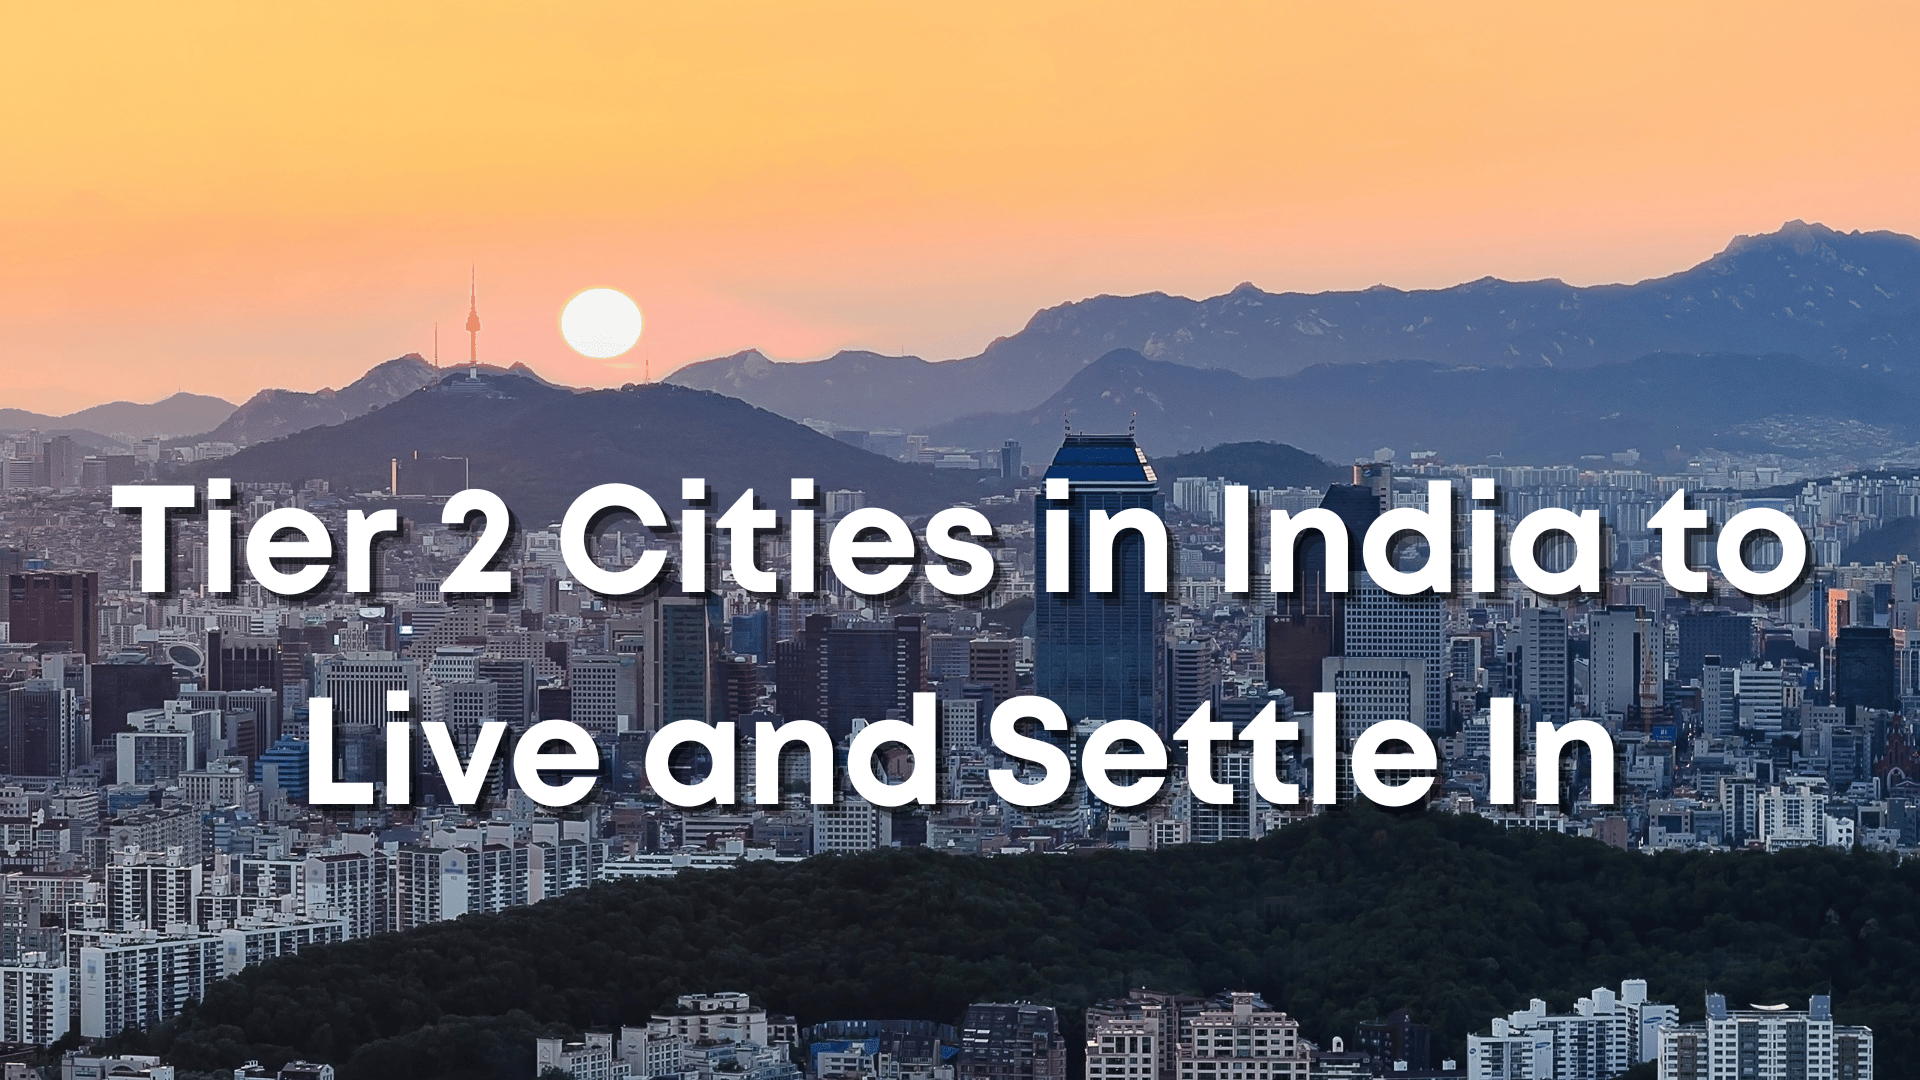 Tier 2 Cities in India to Live and Settle In